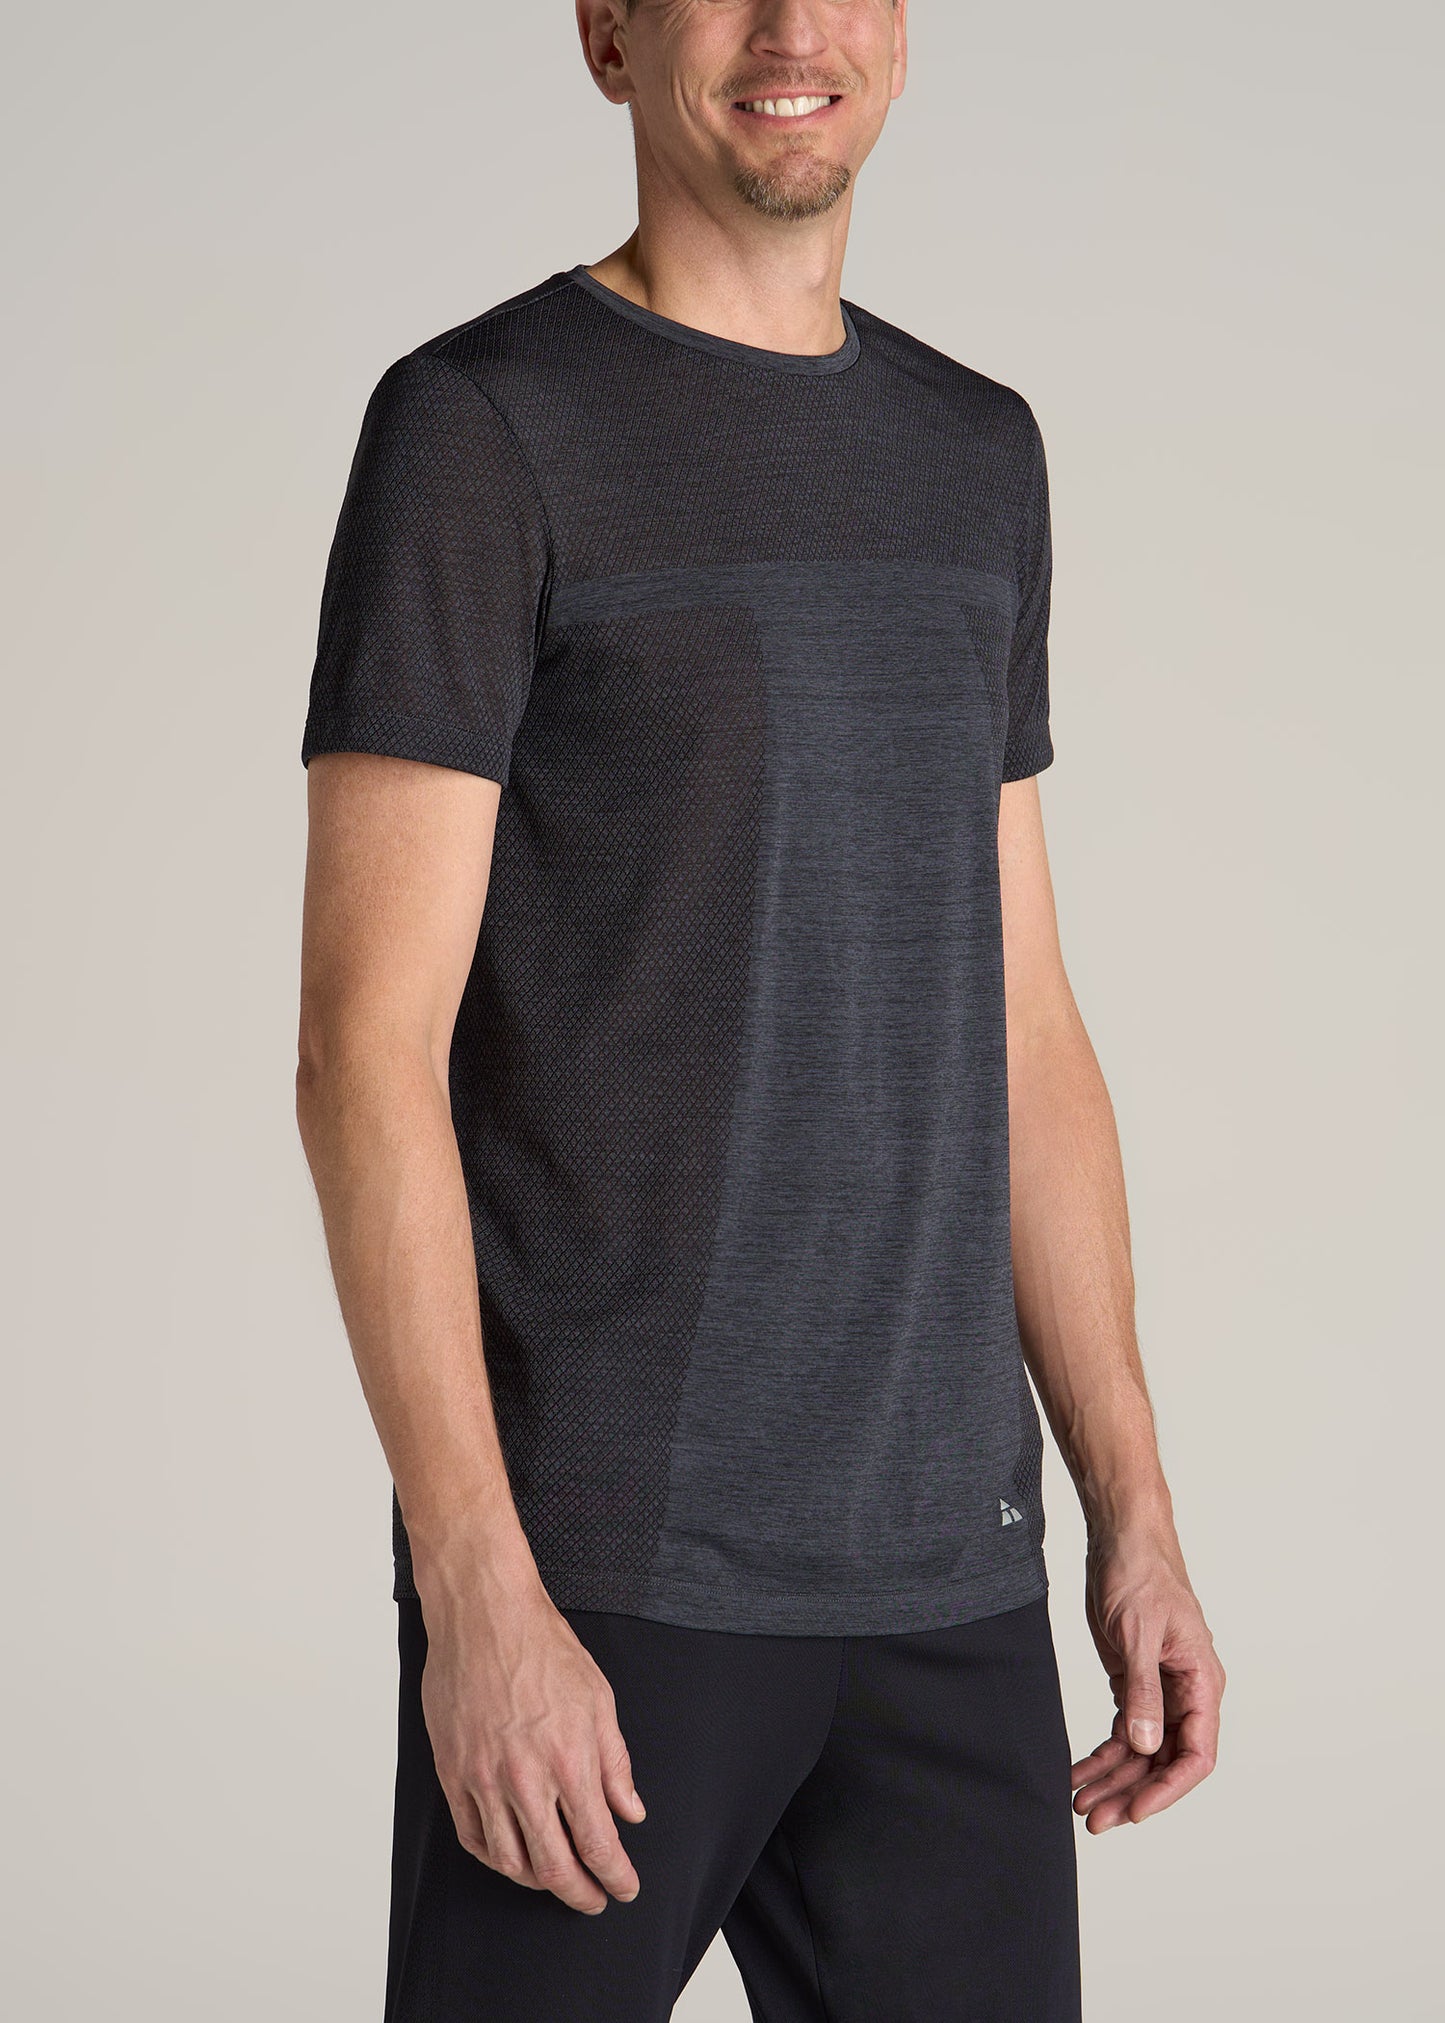 American-Tall-Men-AT-Performance-Engineered-Athletic-Tee-Charcoal-Mix-side